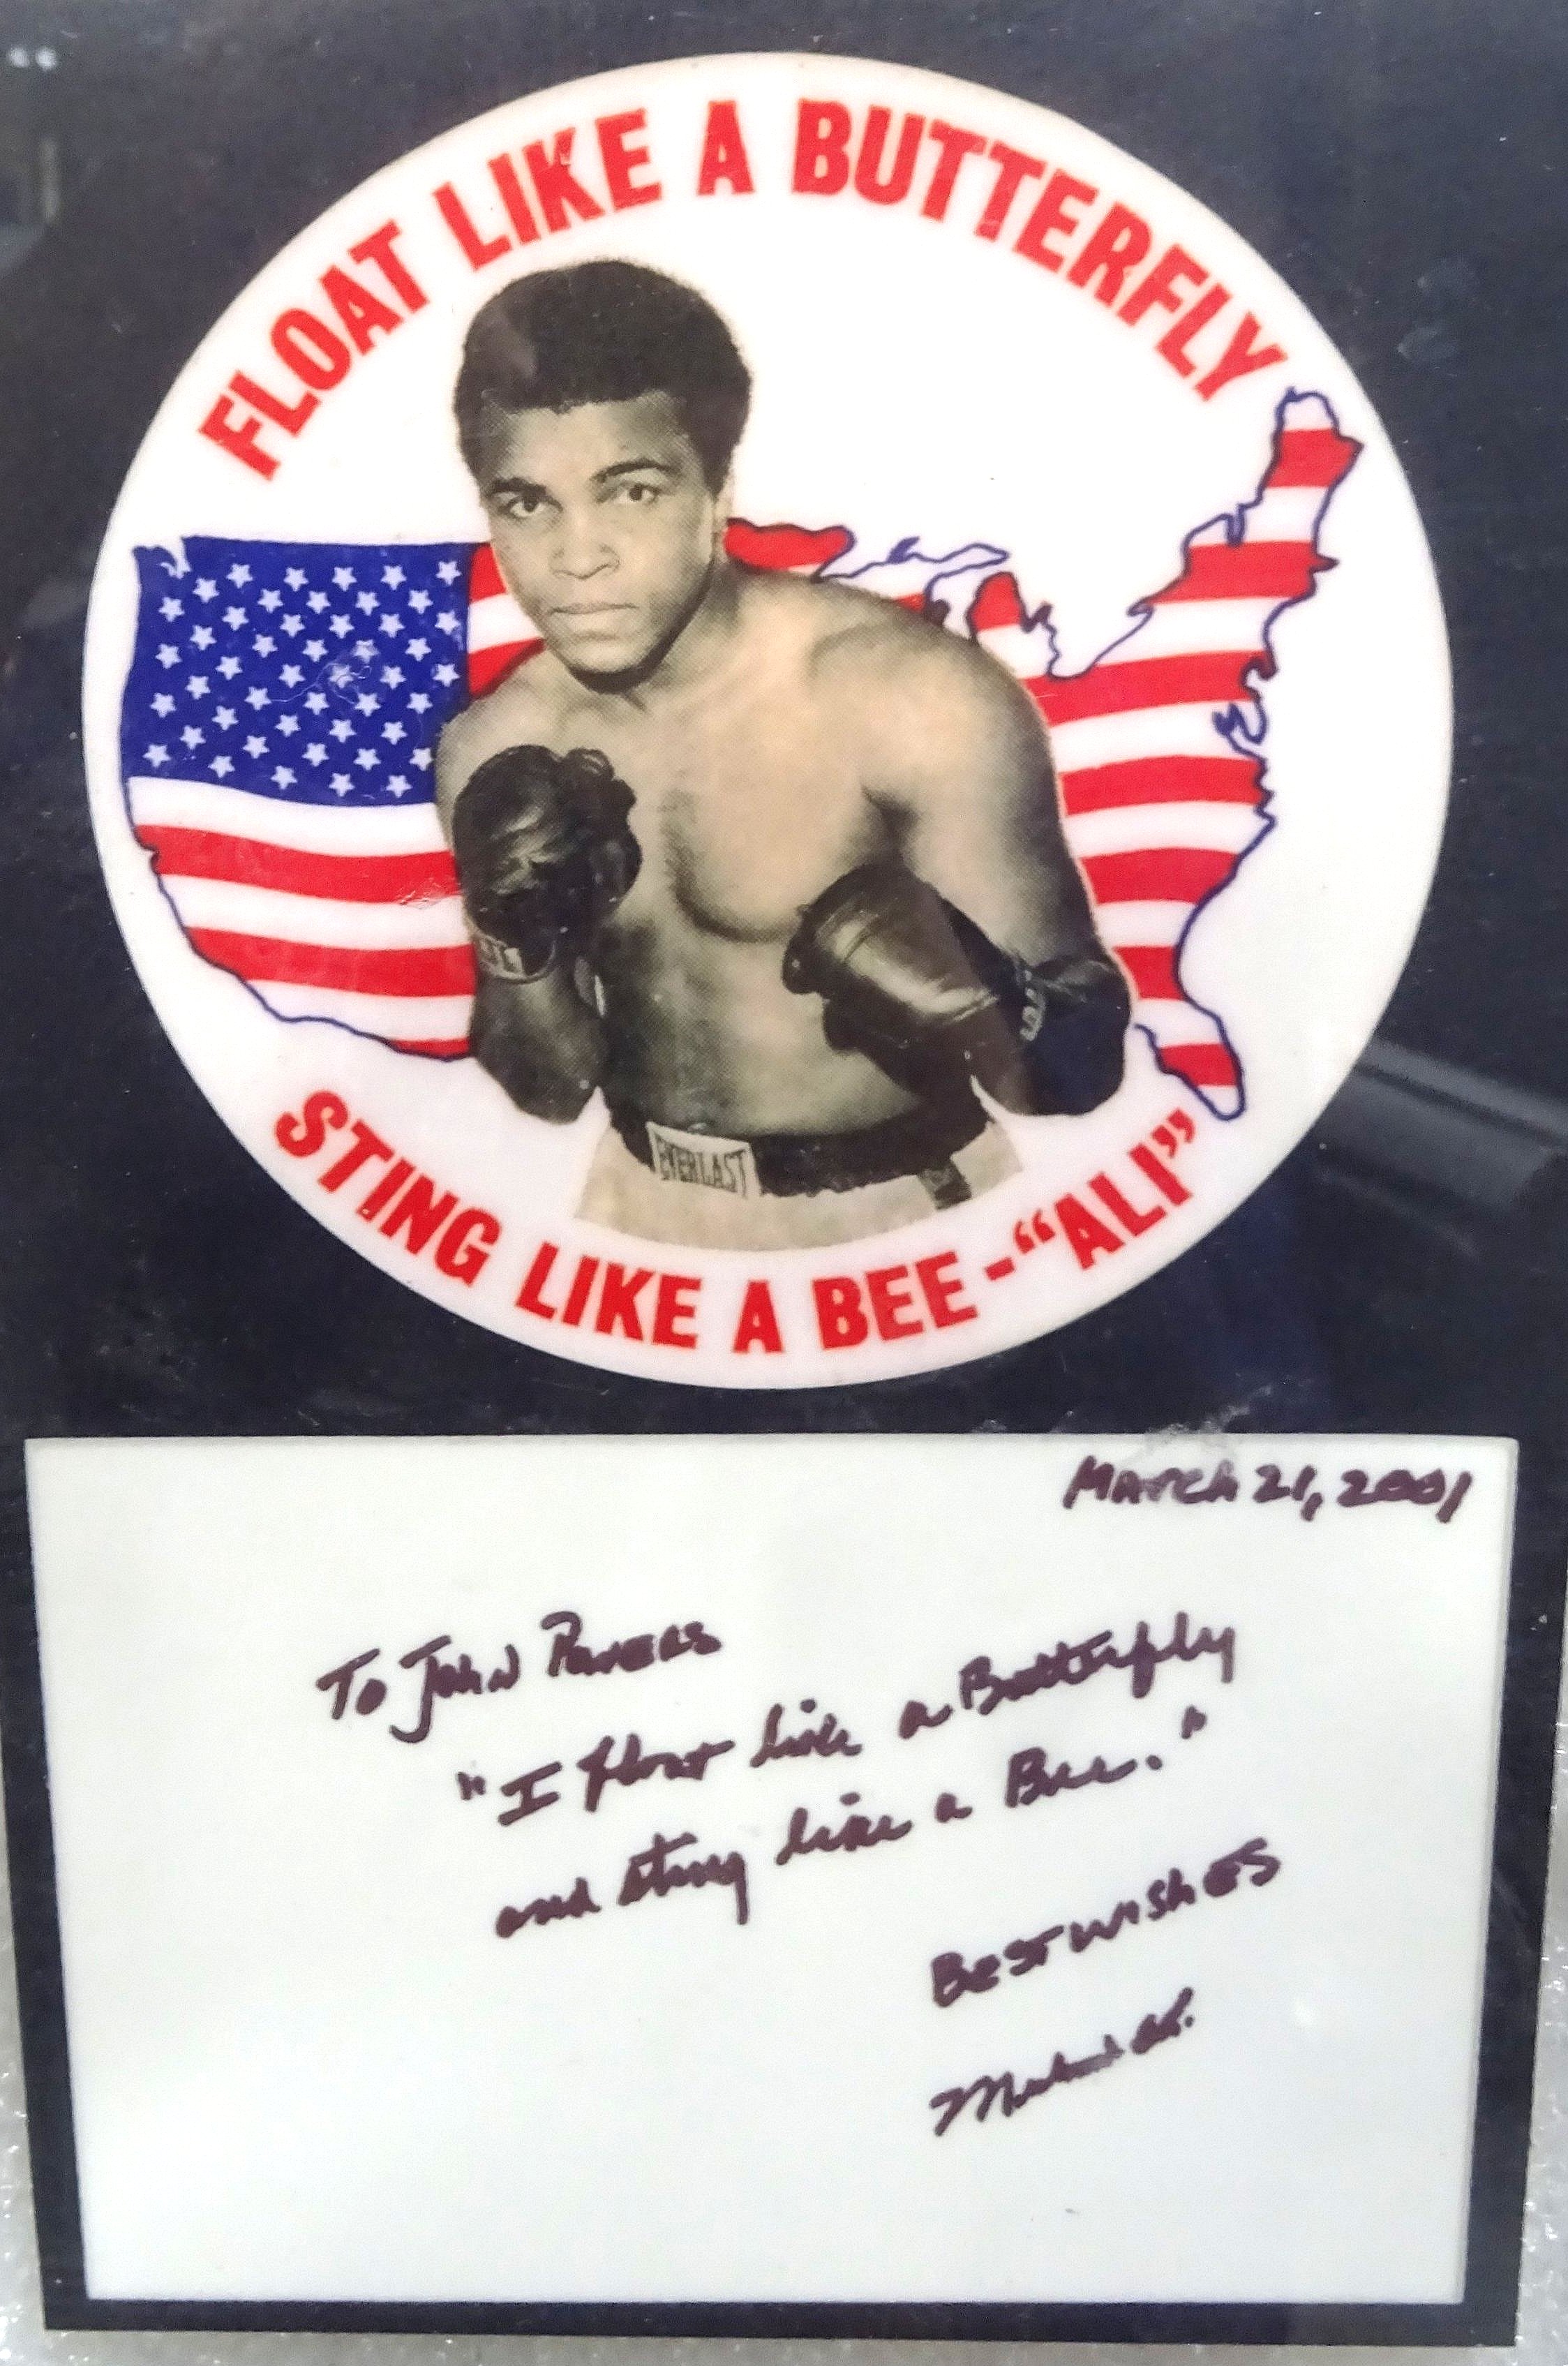 MuhammadAli Note to John Powers Butterfly Display by Orkin Canada, 15-17 April 2016